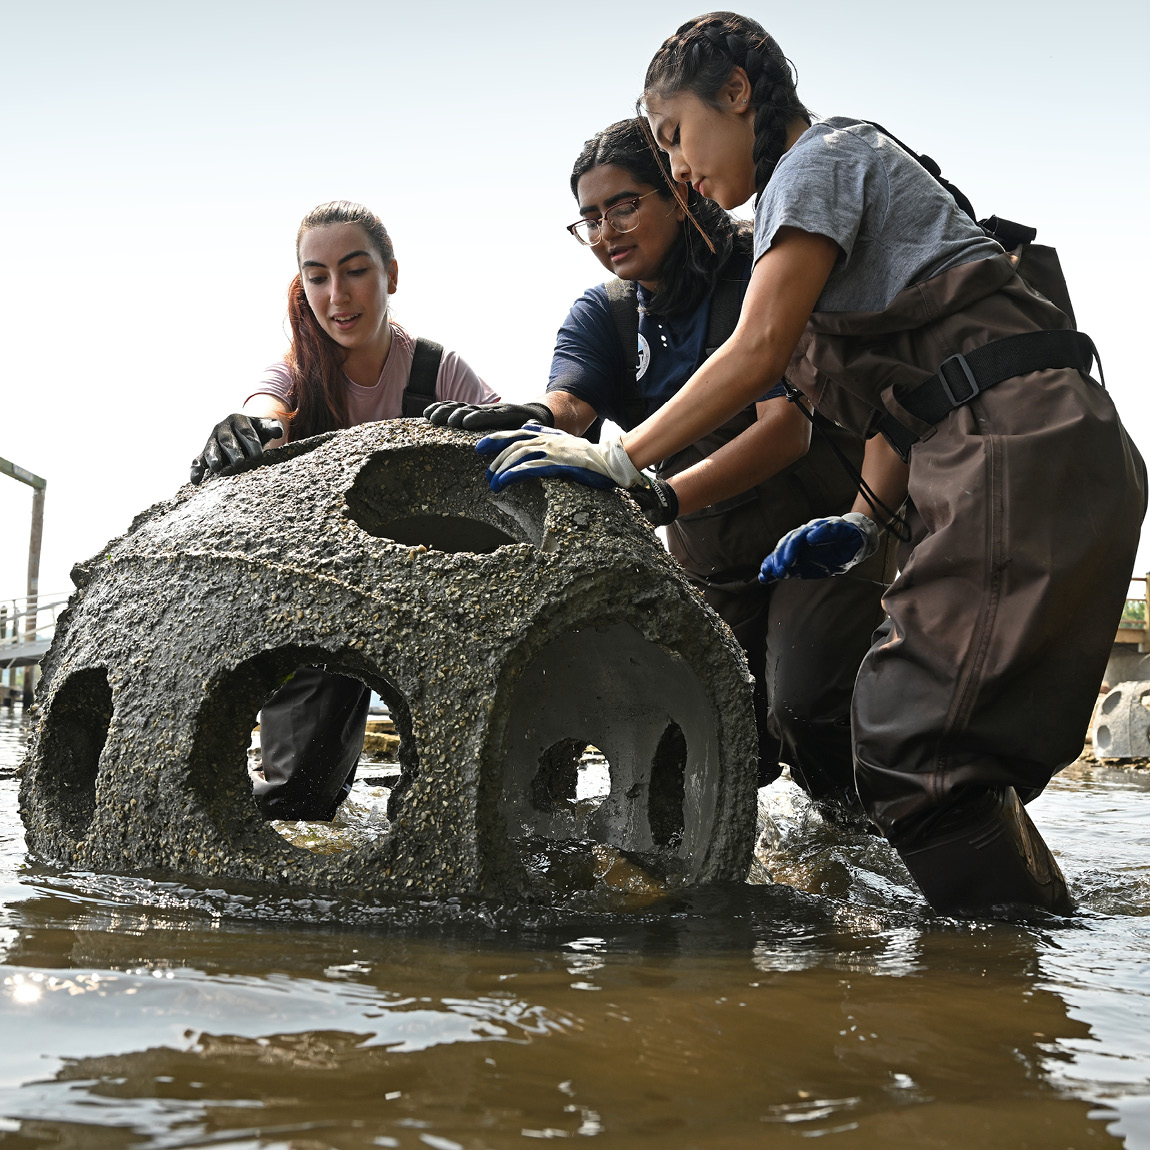 Student researchers place a reef ball into the Thames River